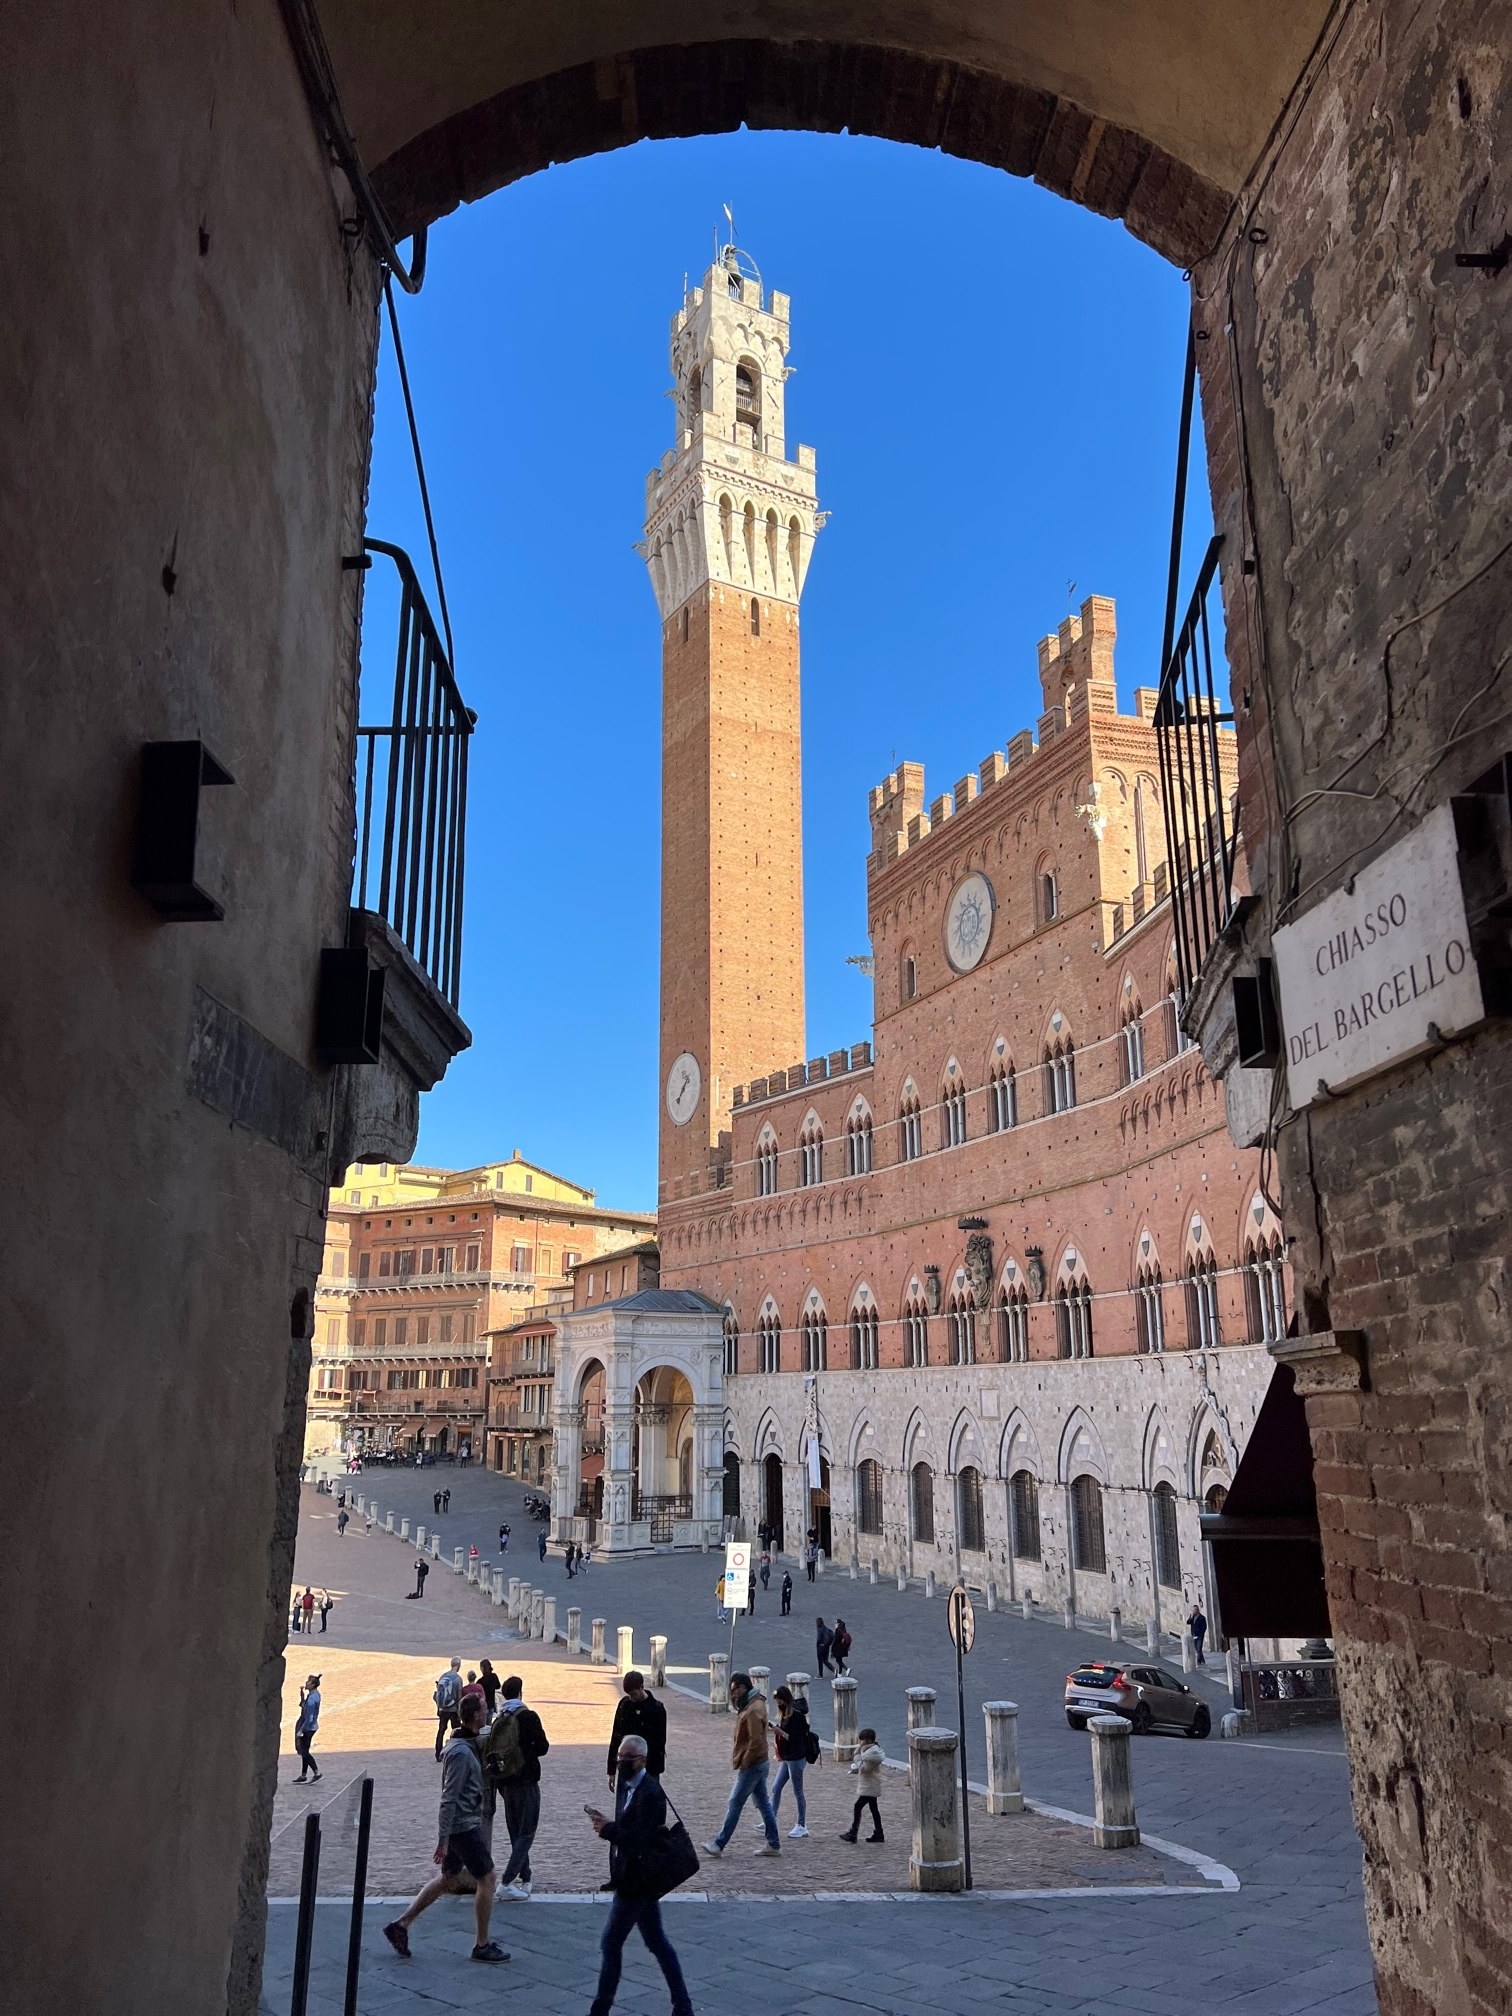 A view of the main square in Siena, Italy